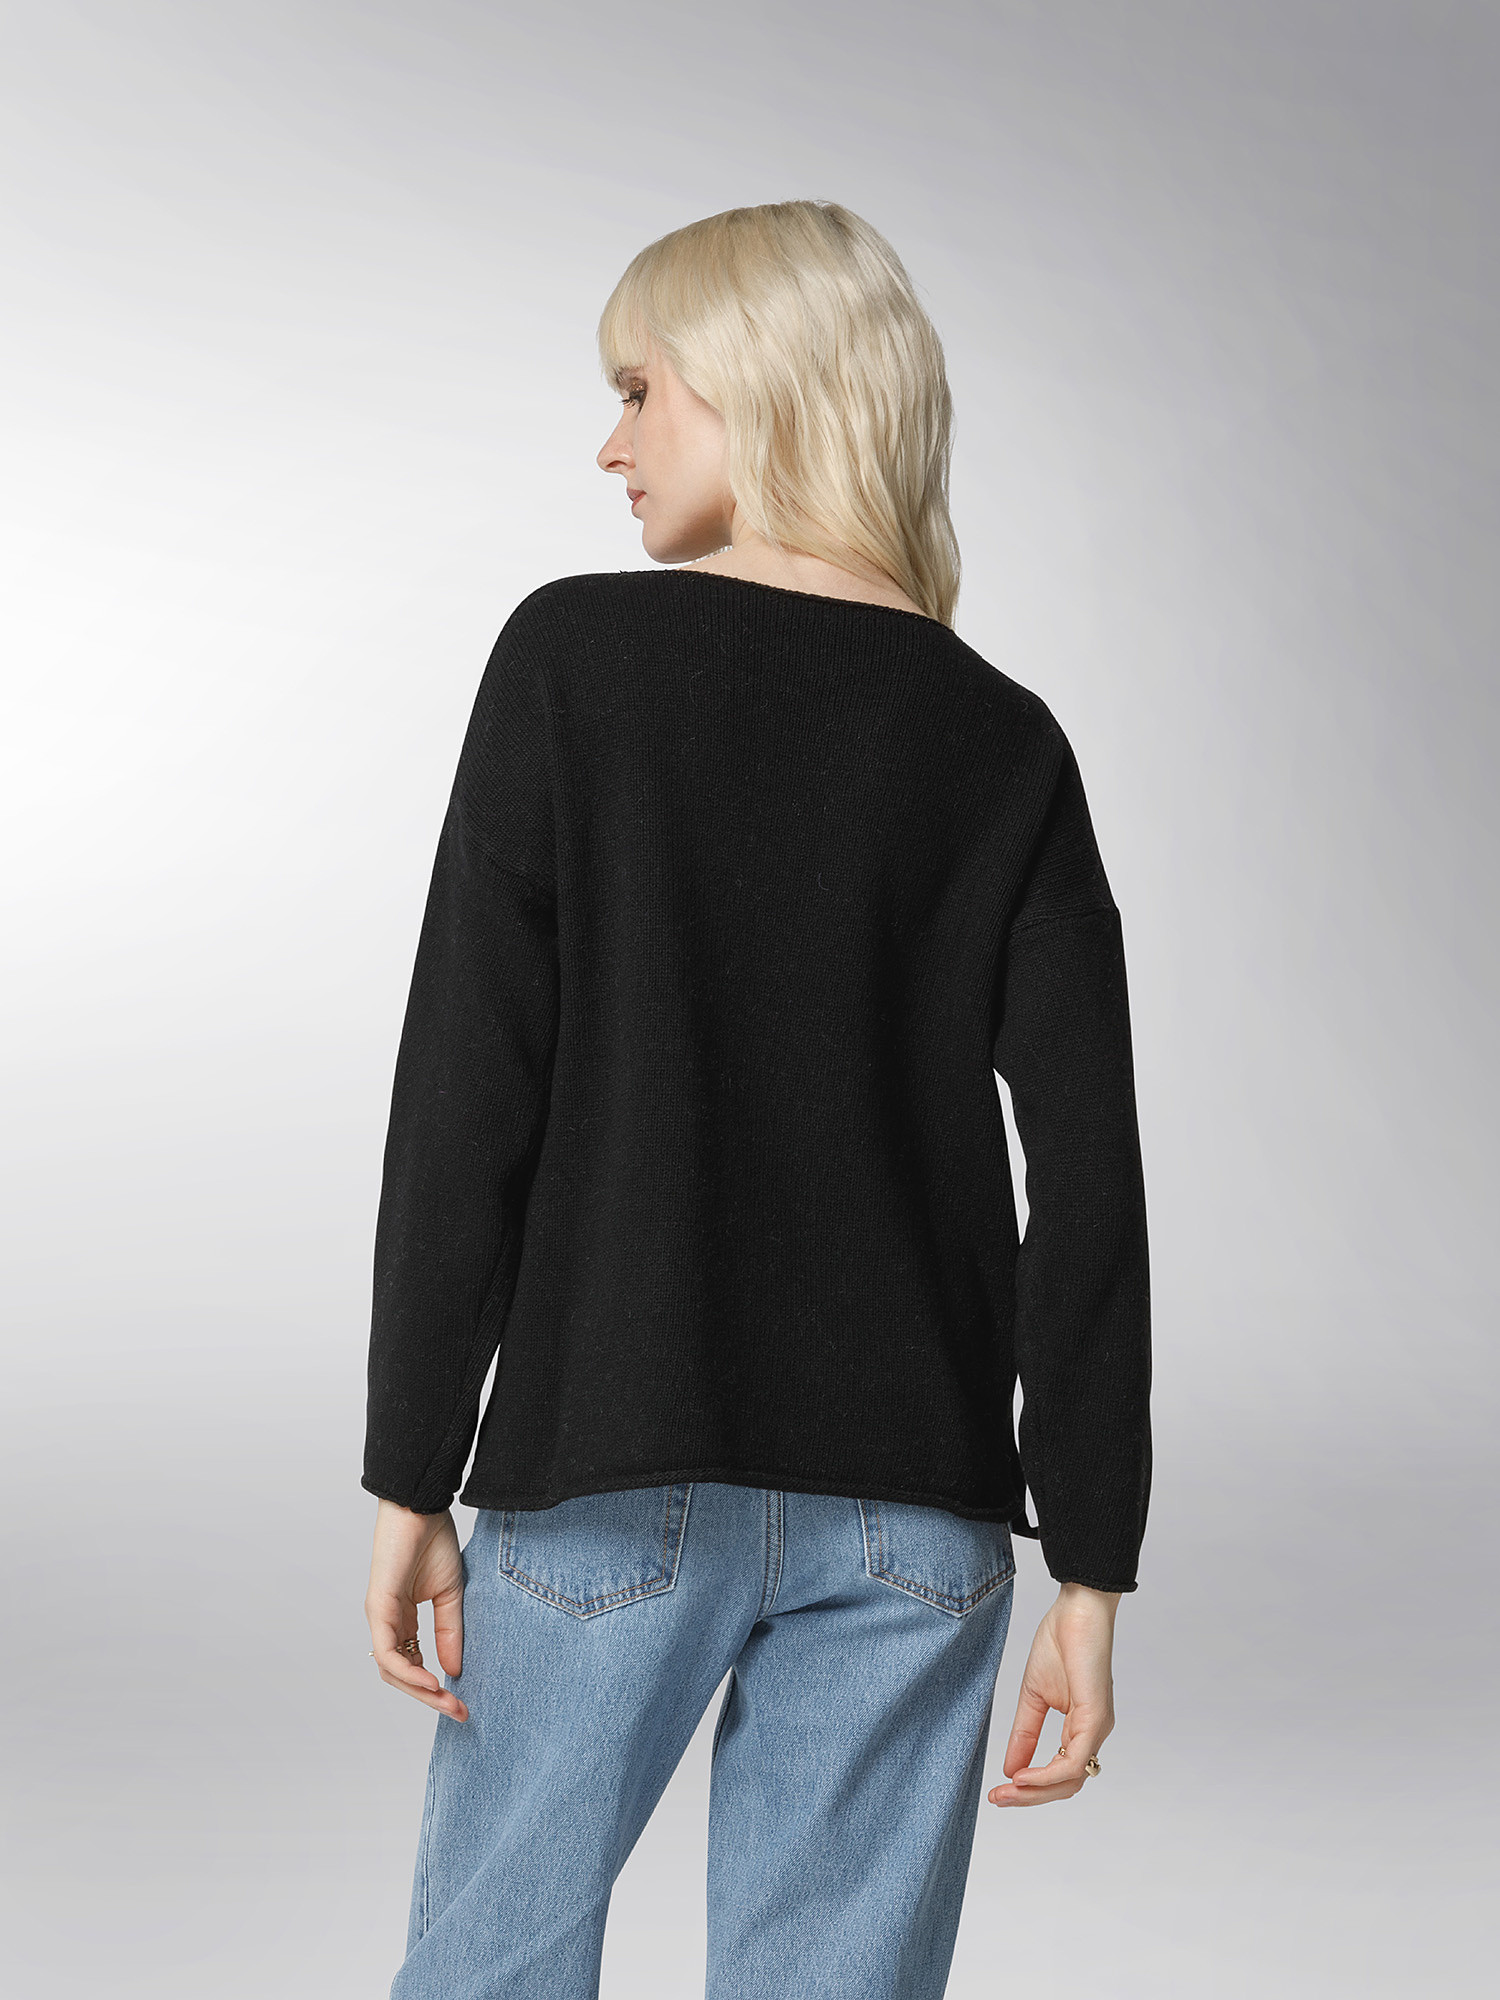 K Collection - Over sweater, Black, large image number 4